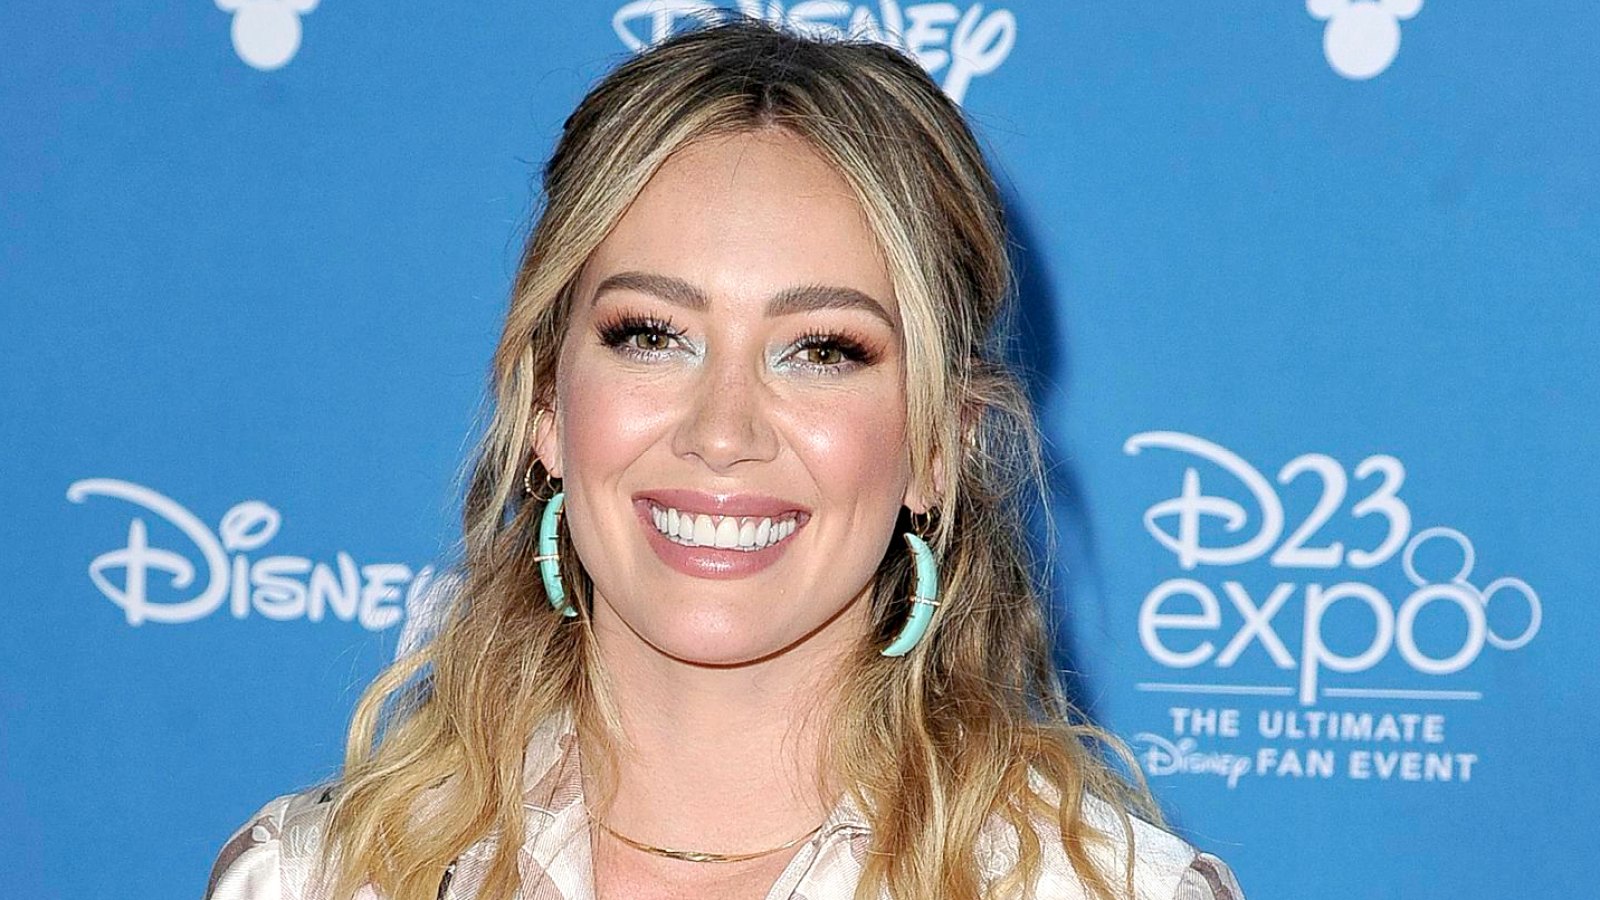 Hilary Duff on How She Feels About Disney After Lizzie McGuire Drama